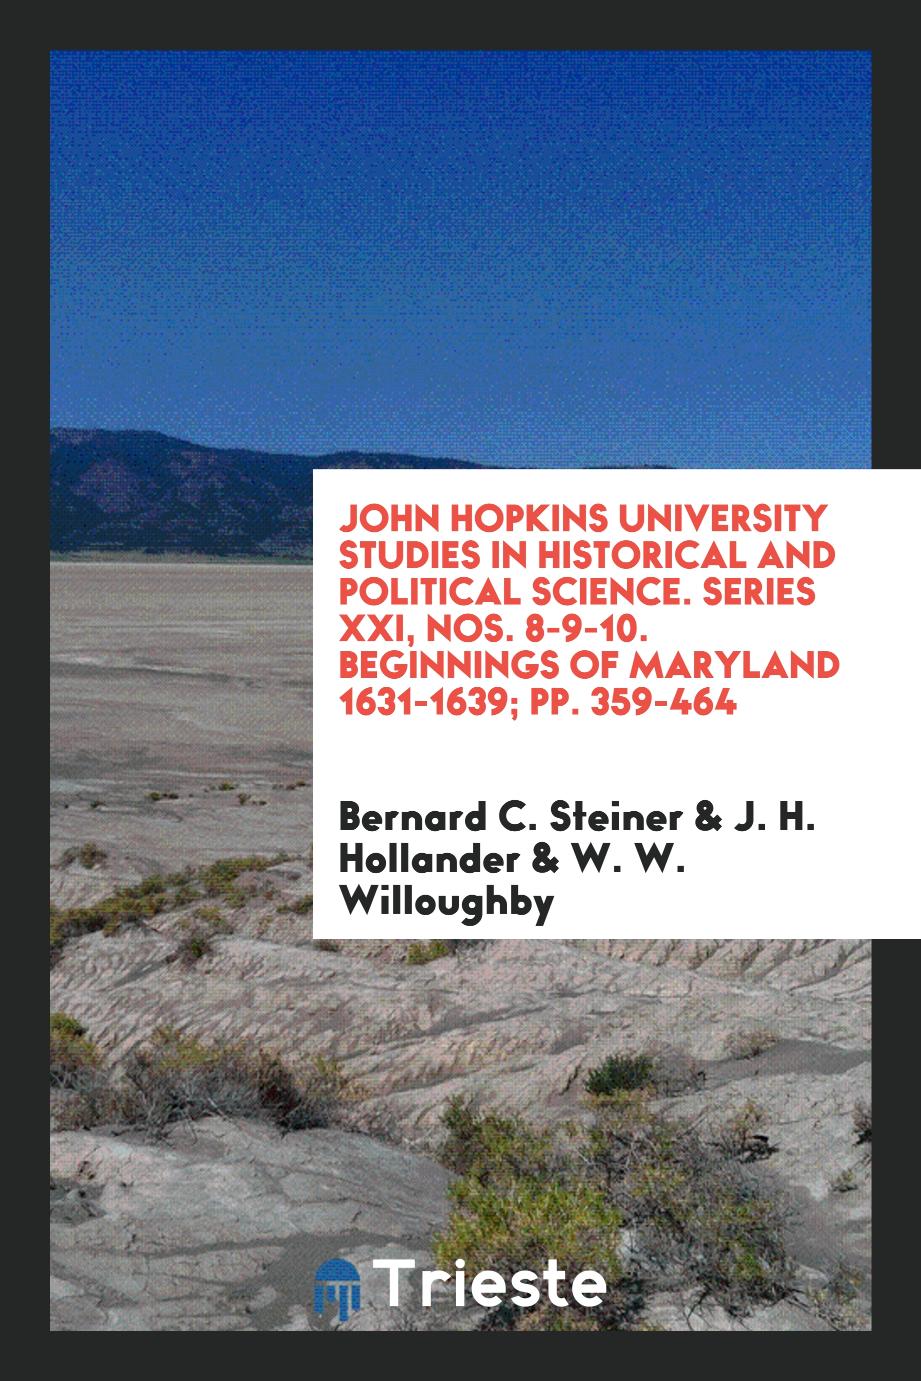 John Hopkins University Studies in Historical and Political Science. Series XXI, Nos. 8-9-10. Beginnings of Maryland 1631-1639; pp. 359-464